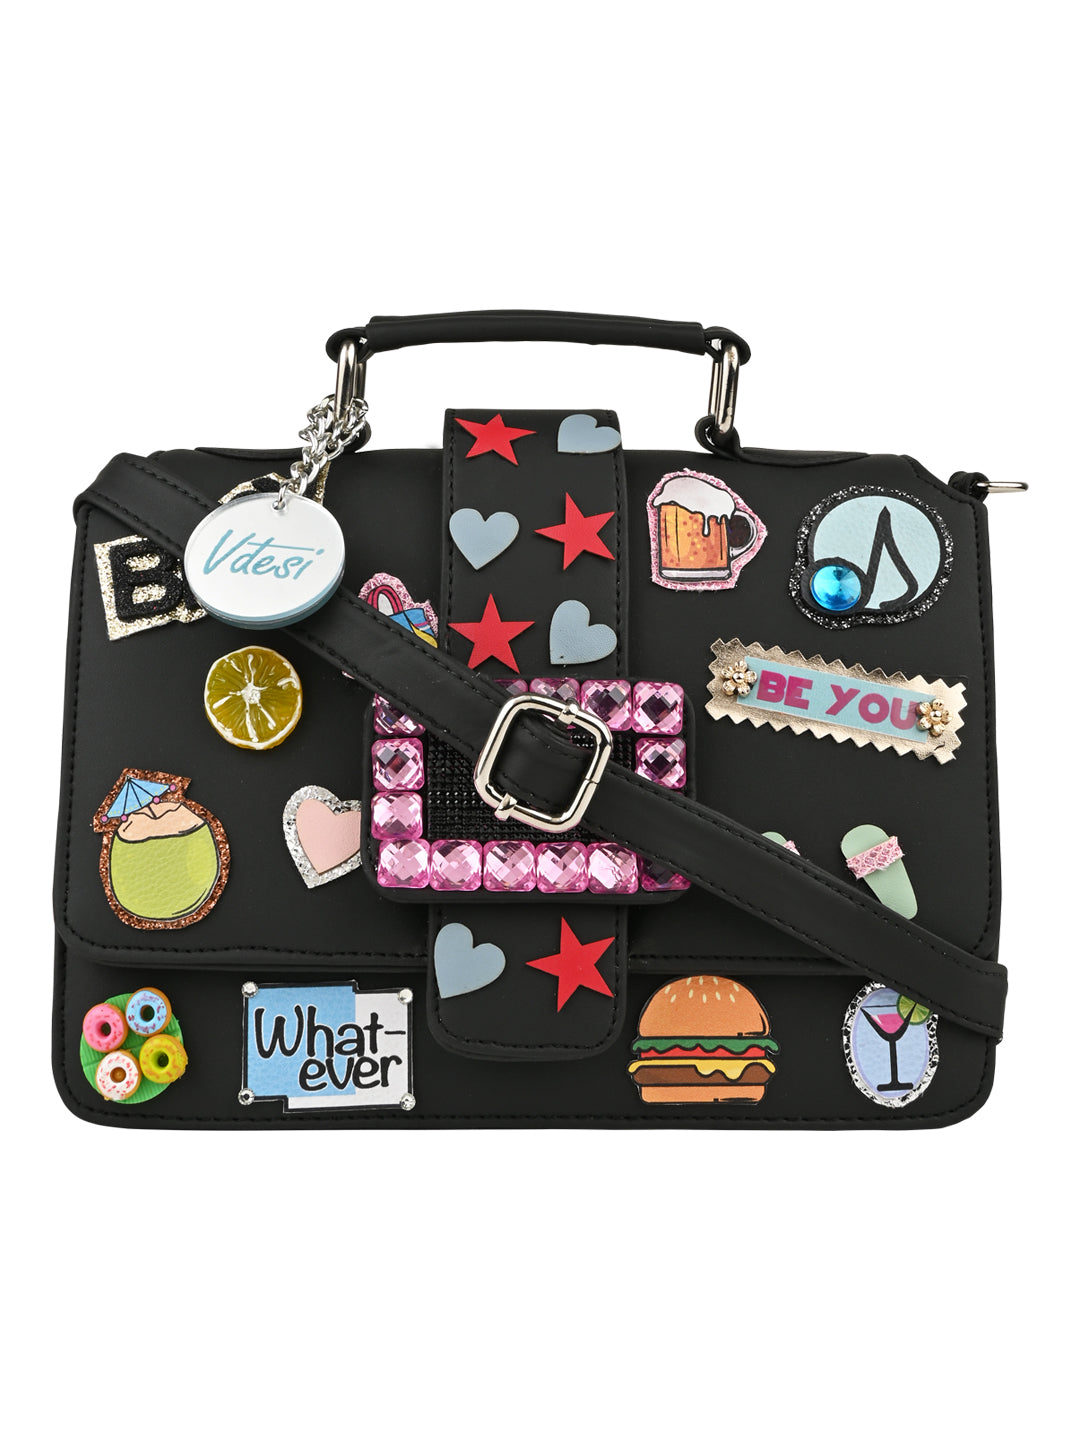 A Black Pop Badges Belt Sling Bag adorned with a plethora of stickers and multiple compartments by Vdesi.